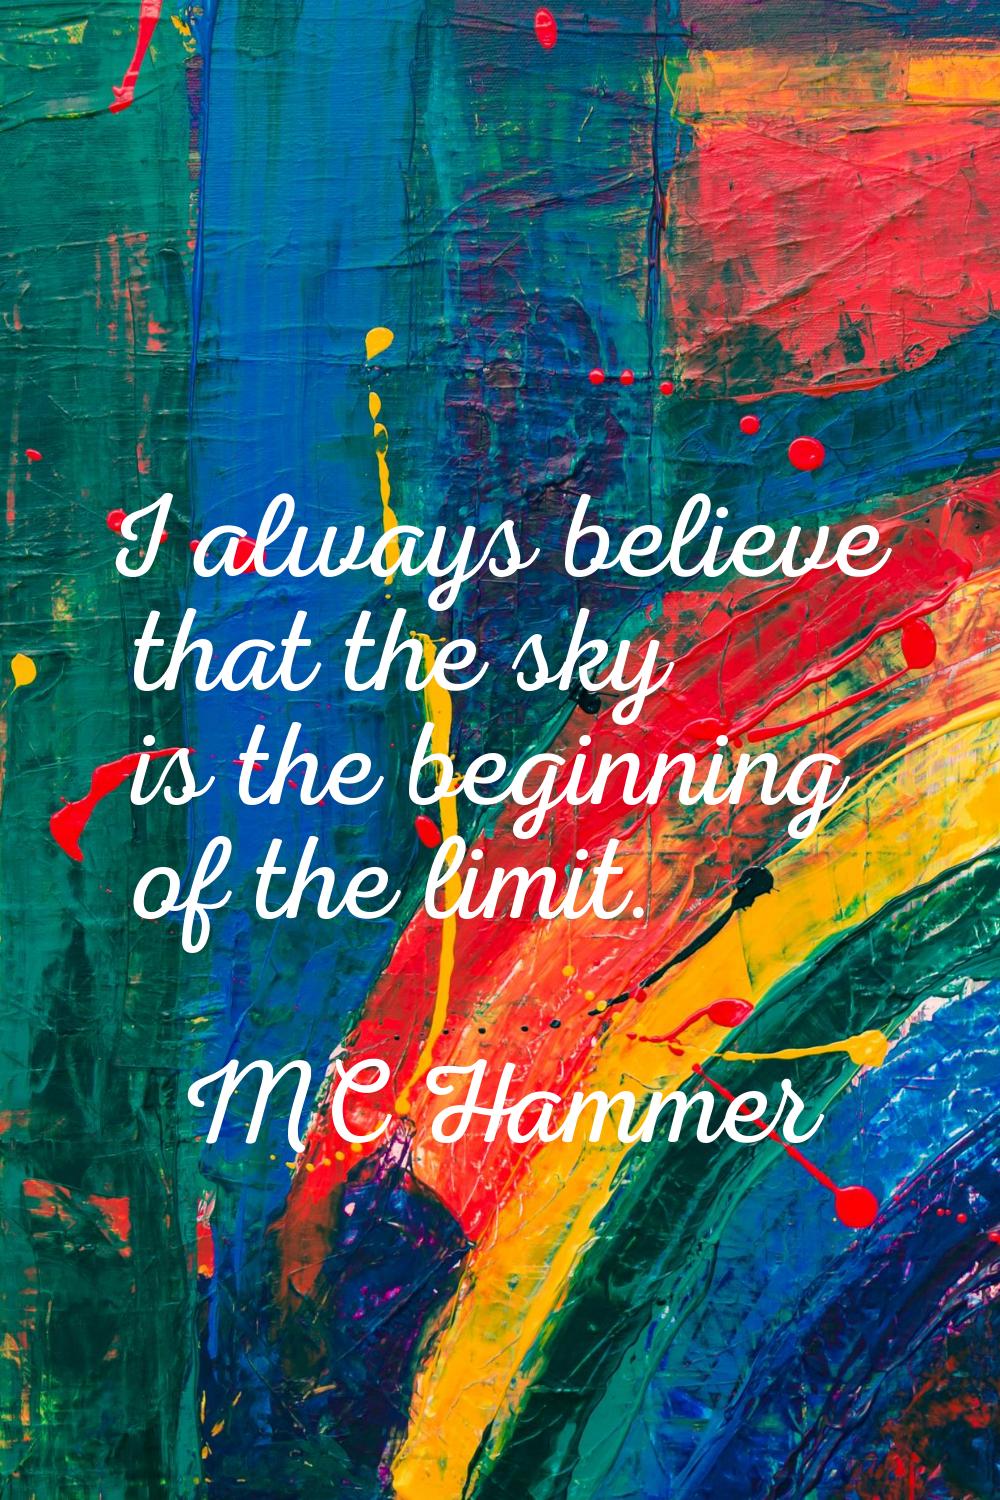 I always believe that the sky is the beginning of the limit.